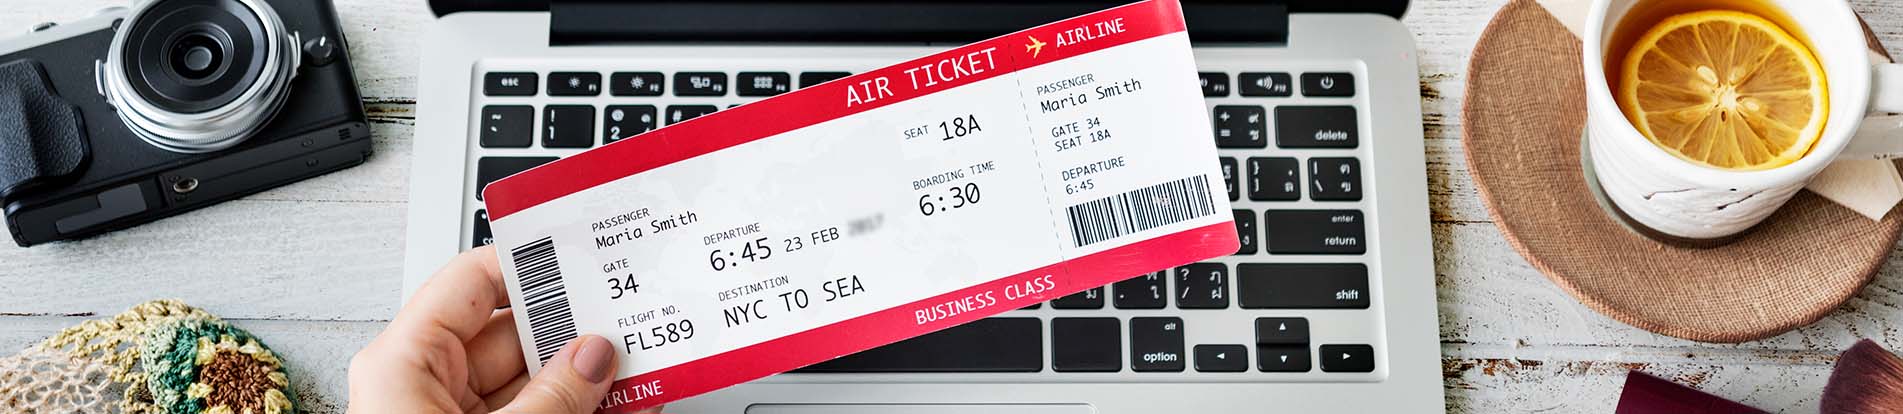 How To Get American Airlines Flights Tickets?